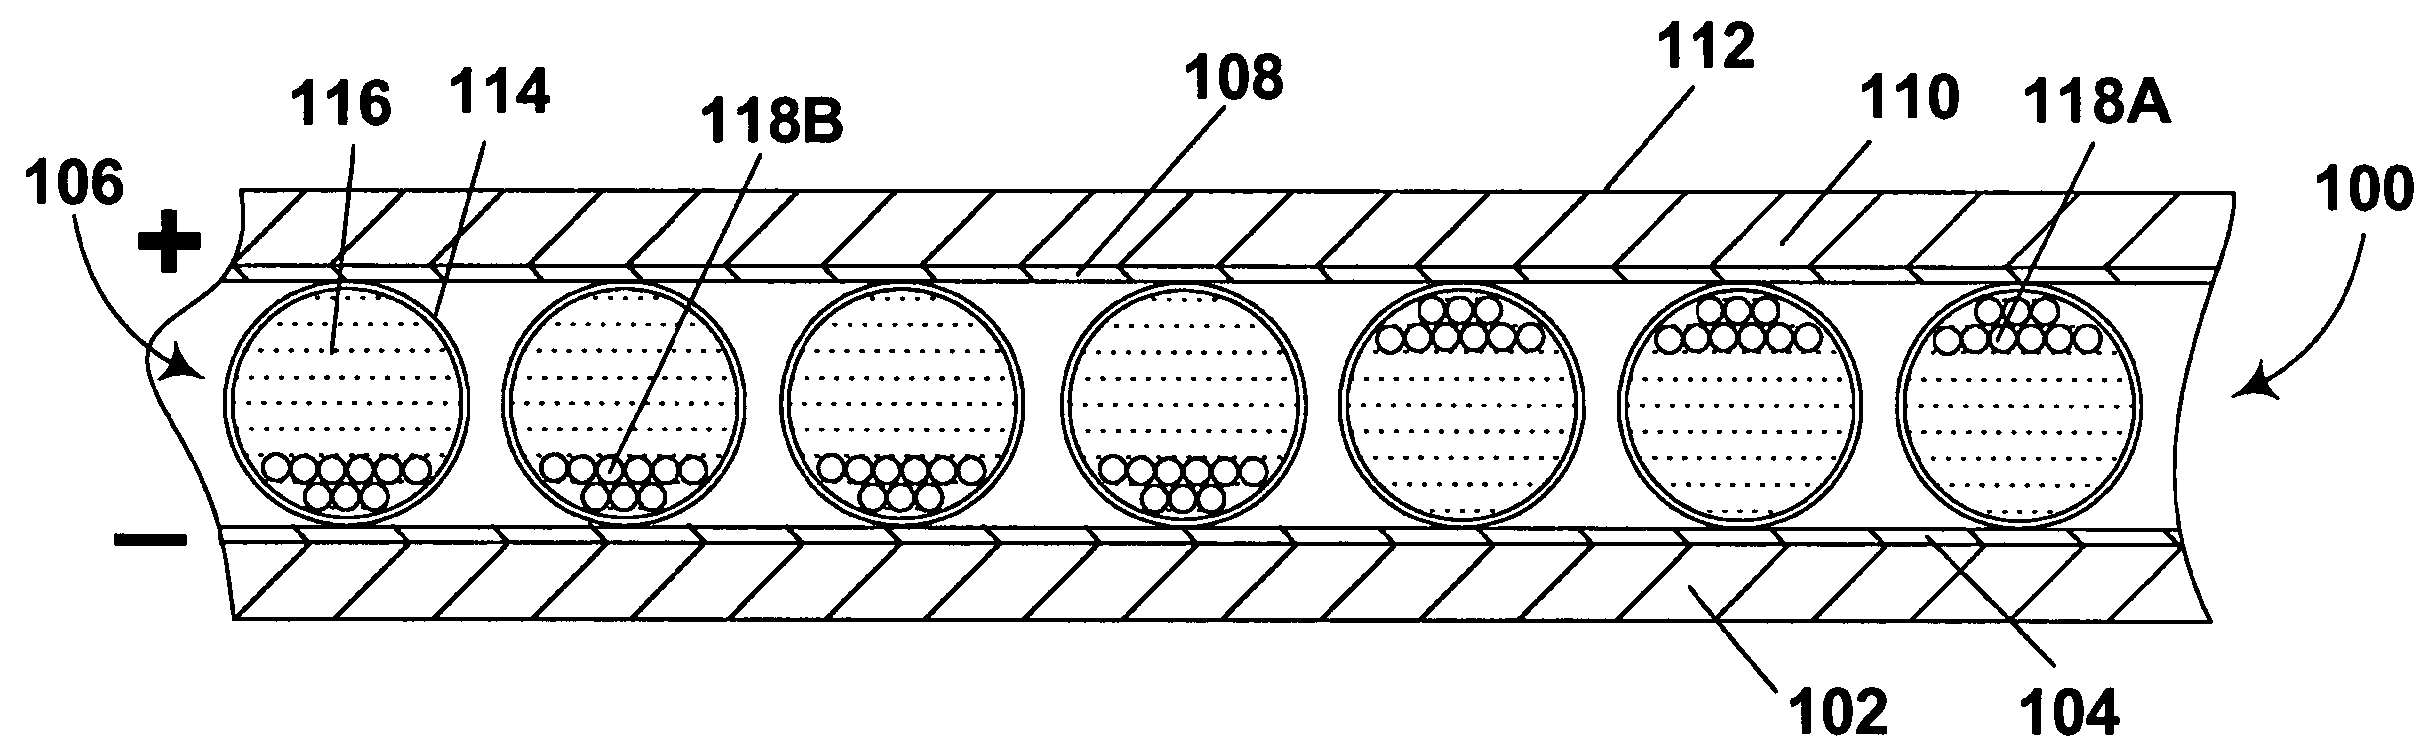 Electro-optic displays, and method for driving same